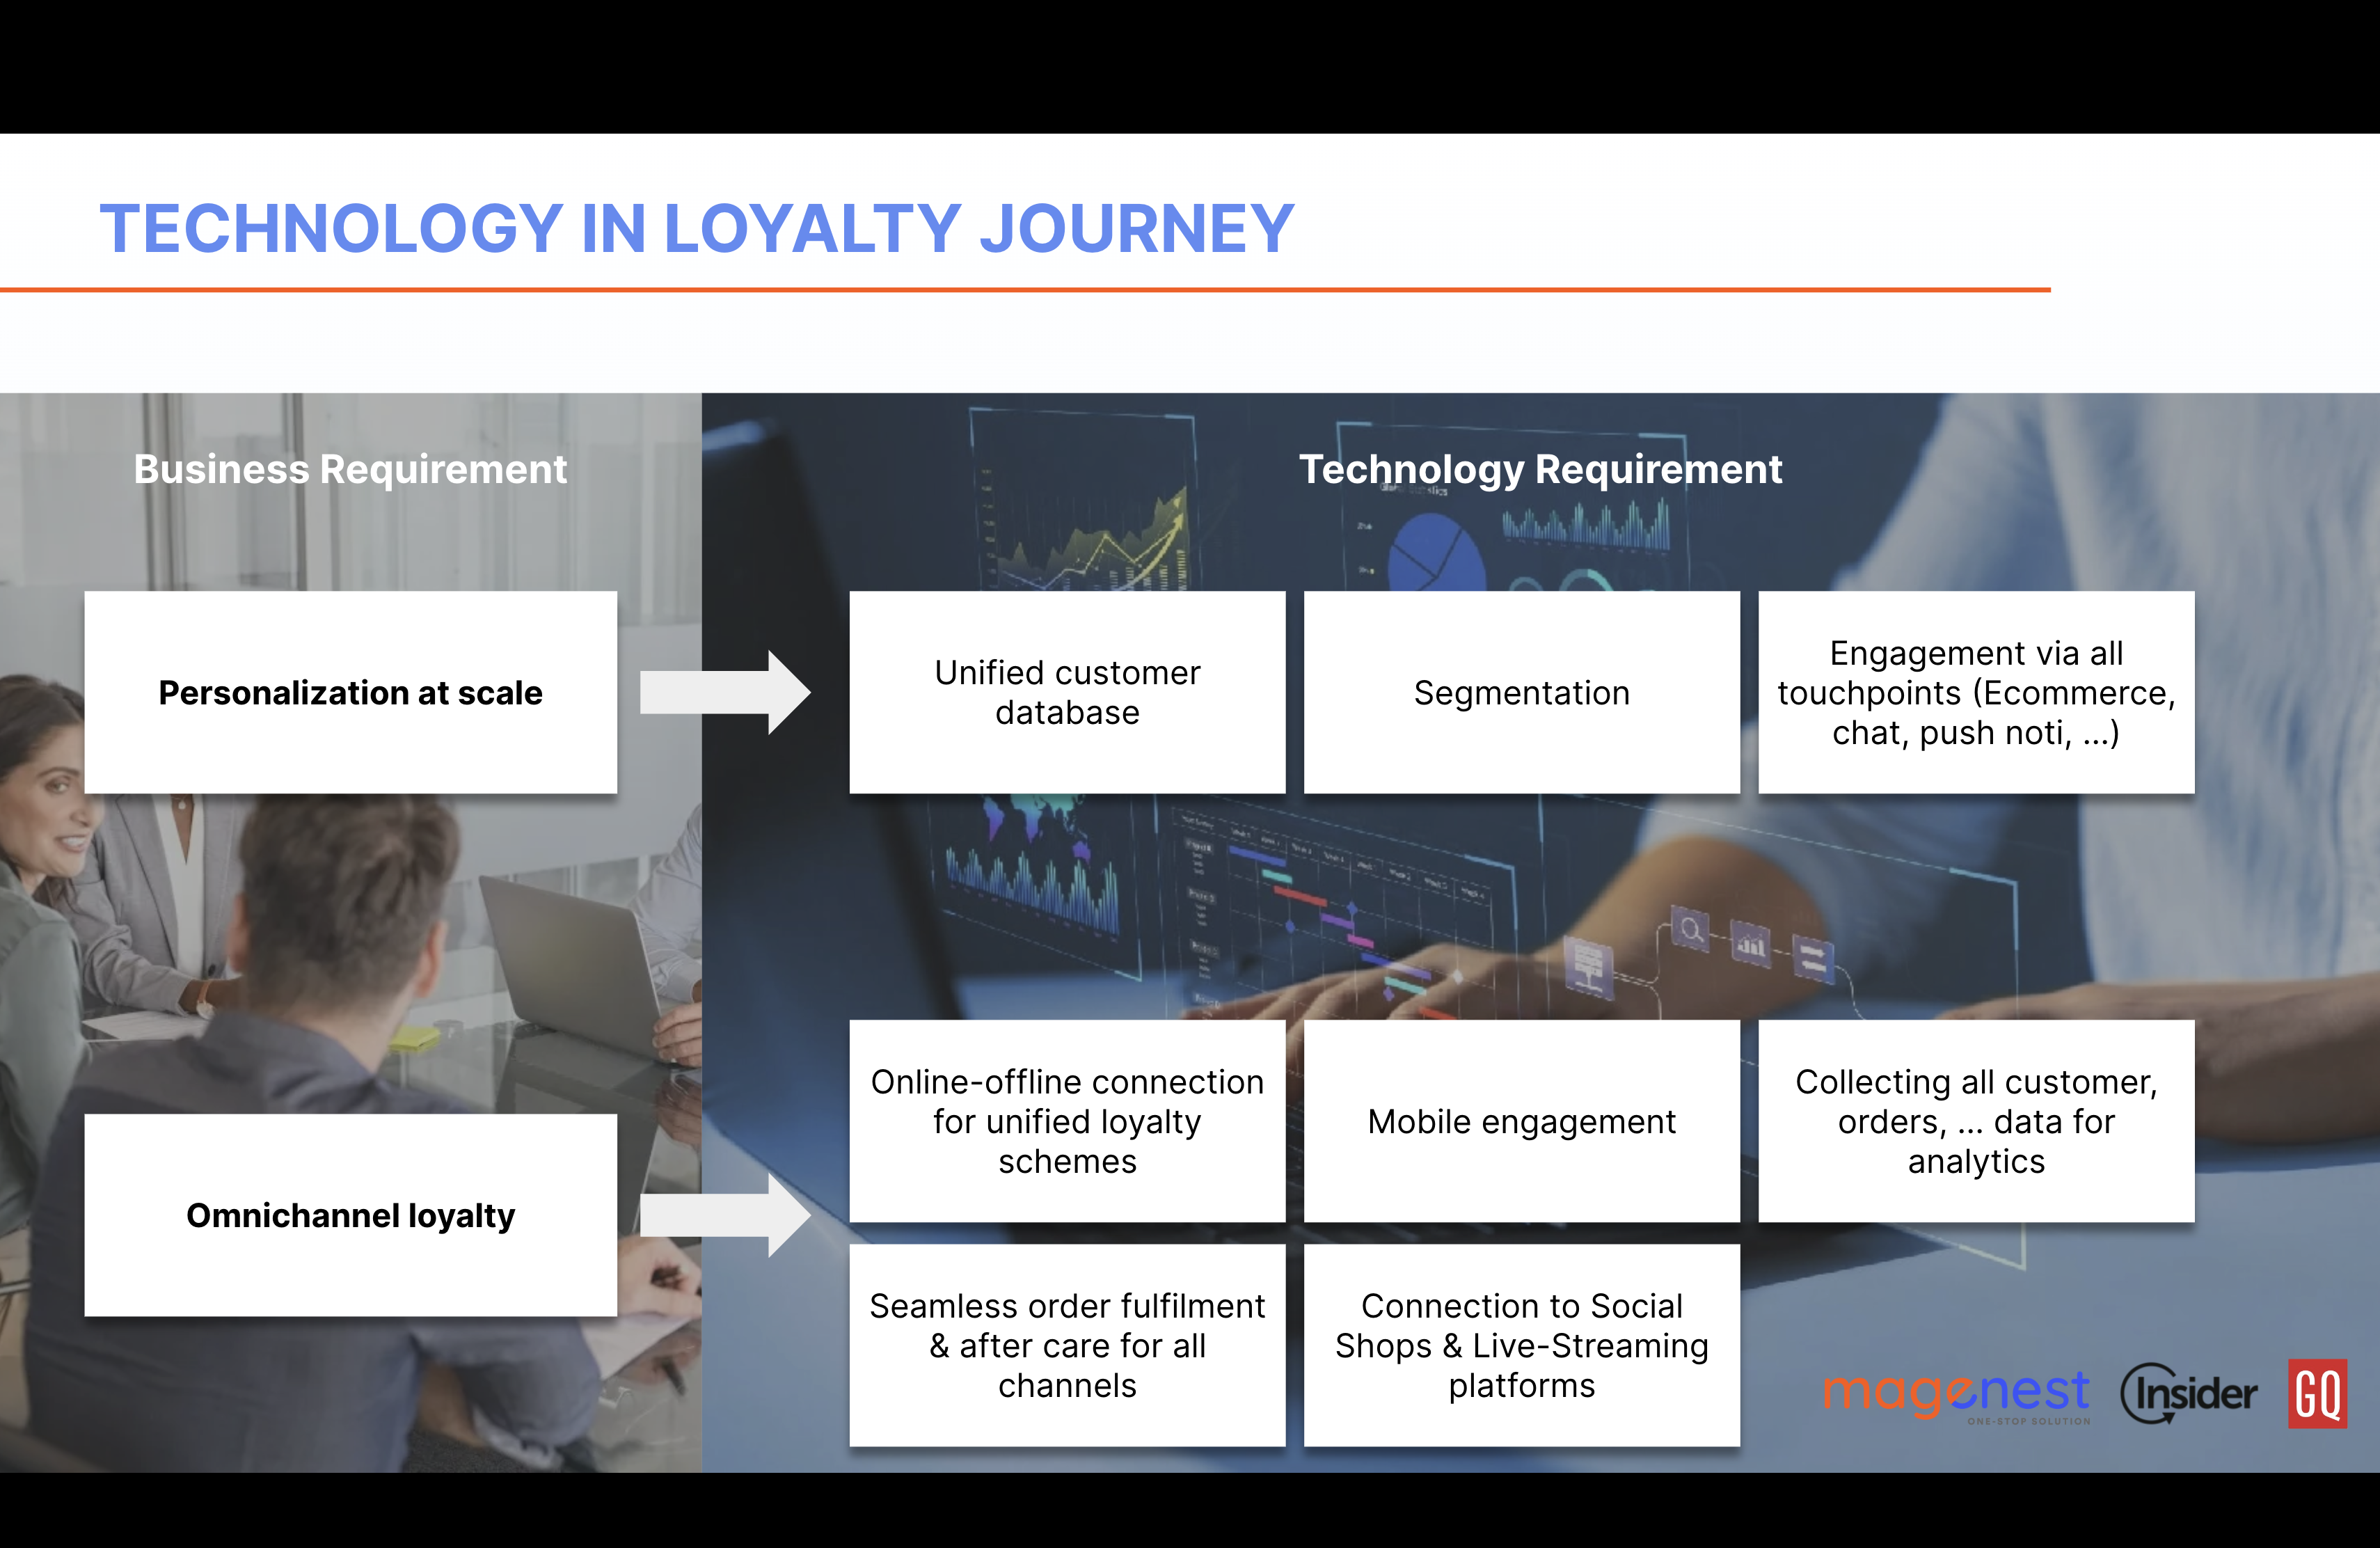 The importance of proper loyalty activities - 5 keys elements